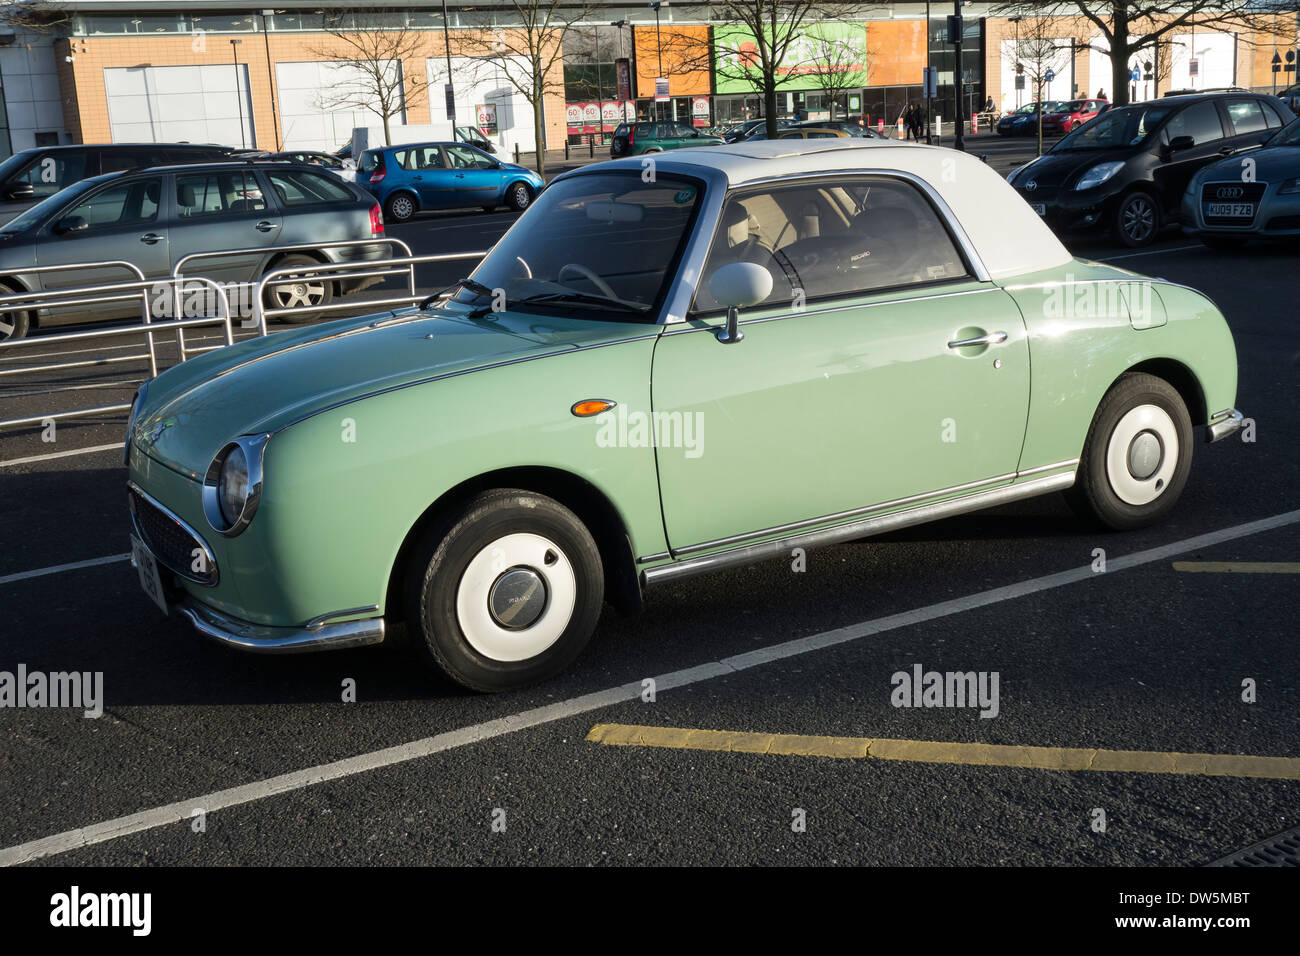 Nissan Figaro city car in Newmarket road car park Stock Photo